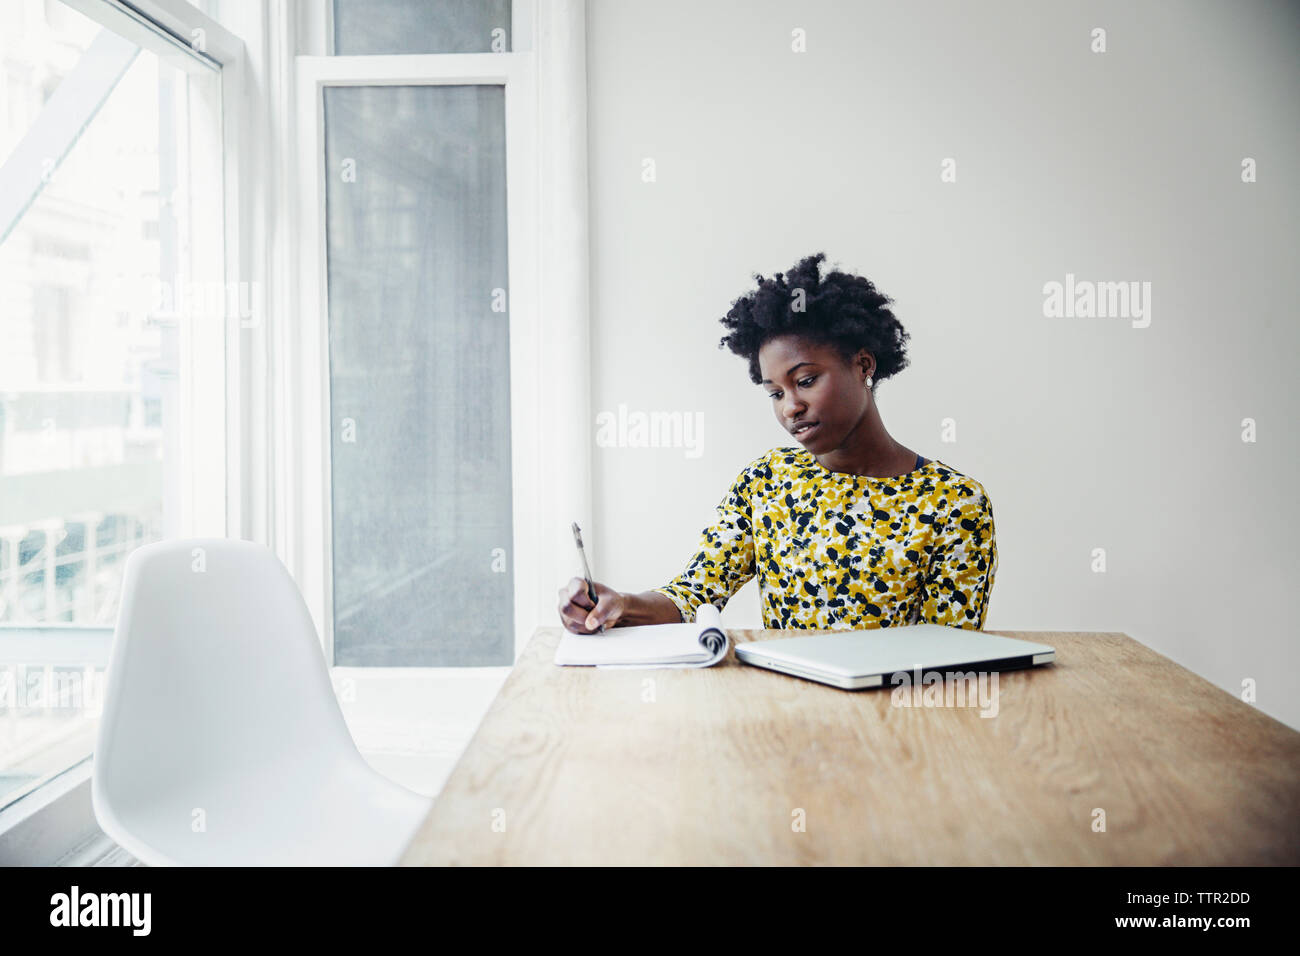 Businesswoman writing in book at desk in board room Stock Photo